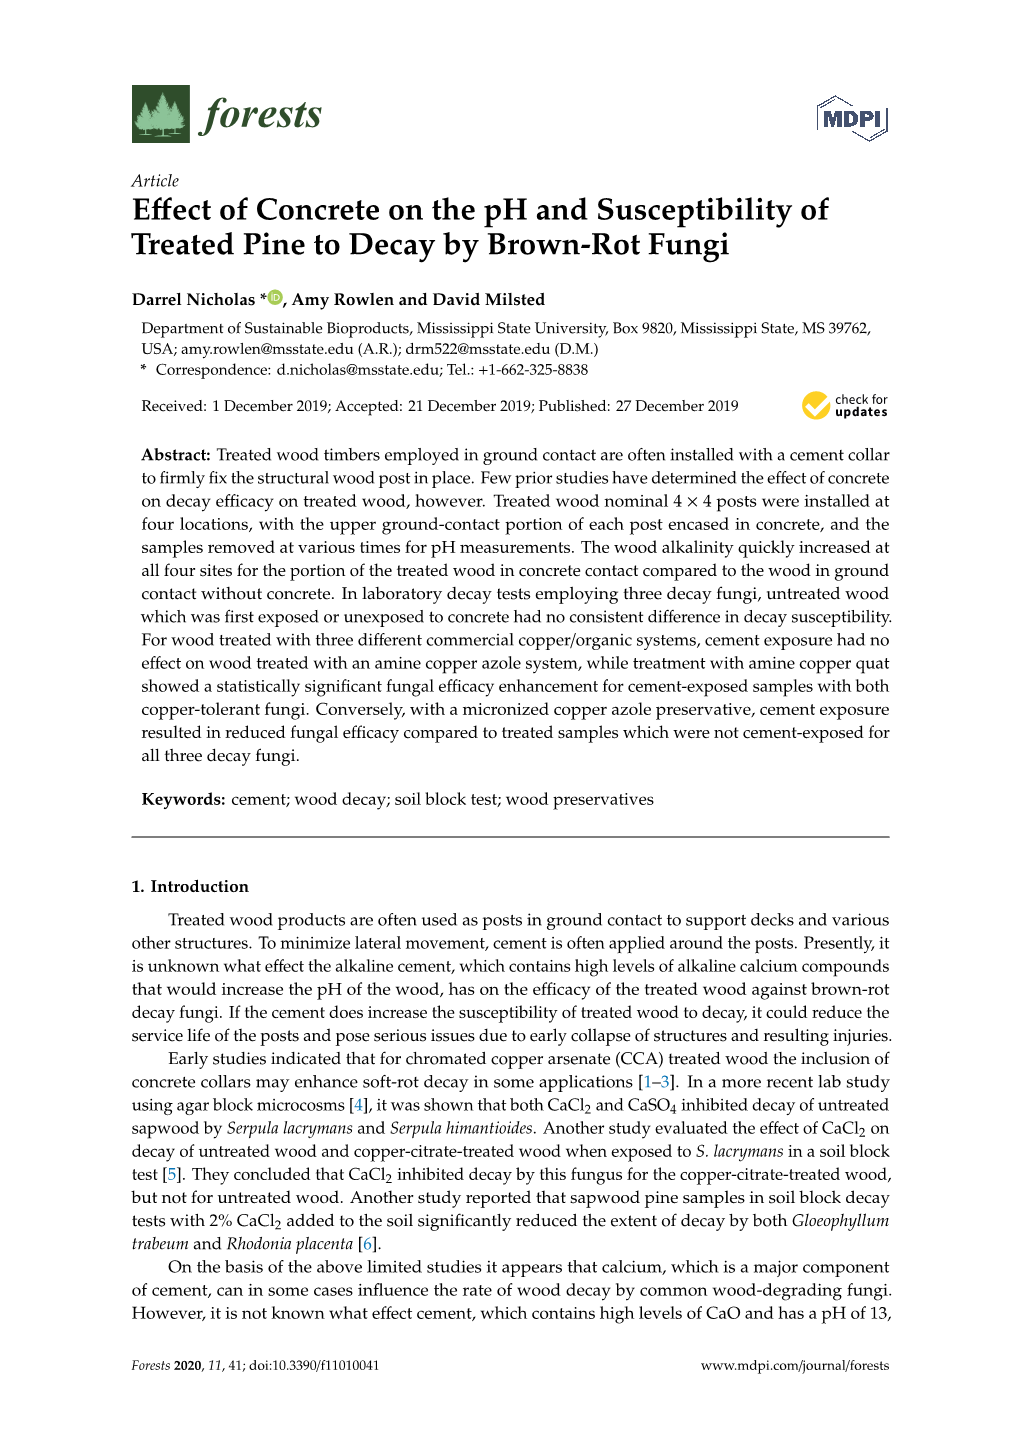 Effect of Concrete on the Ph and Susceptibility of Treated Pine to Decay by Brown-Rot Fungi